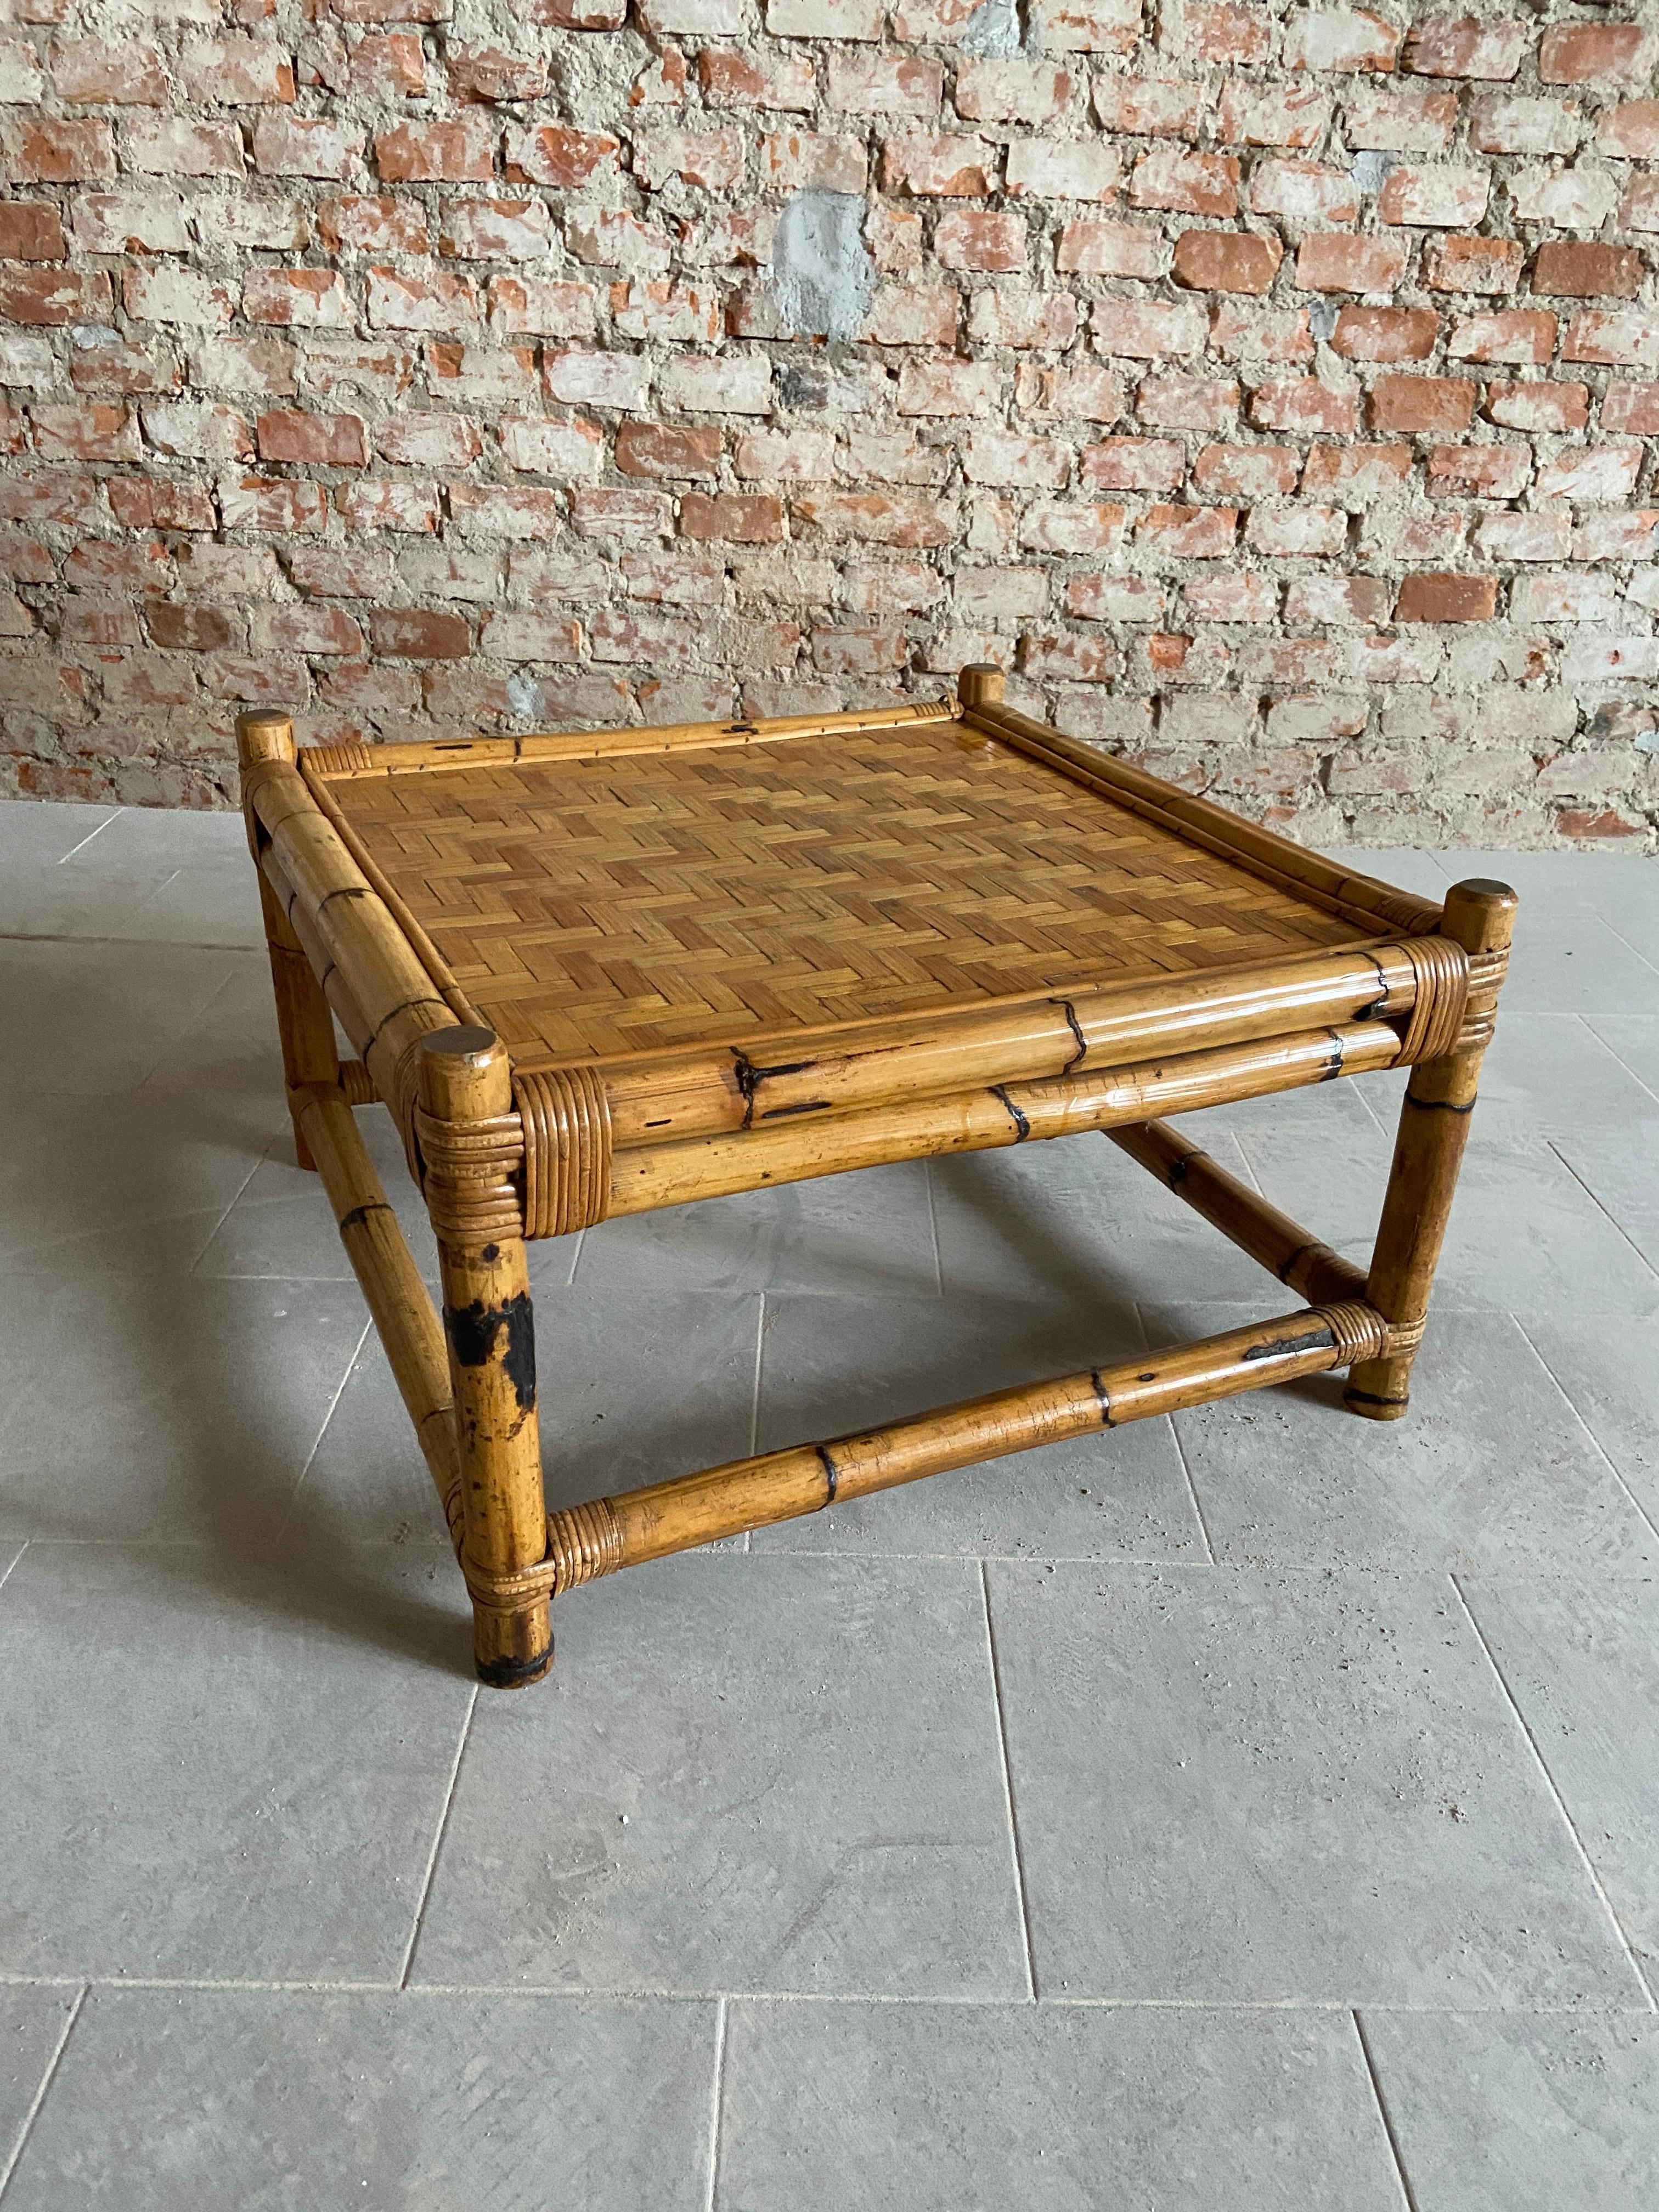 Midcentury Italian bamboo side or coffee table from Vivai del Sud.
If needed the table can come as a set with its sofa and 4 armchairs as shown in the photo.
The is to be quoted on request.